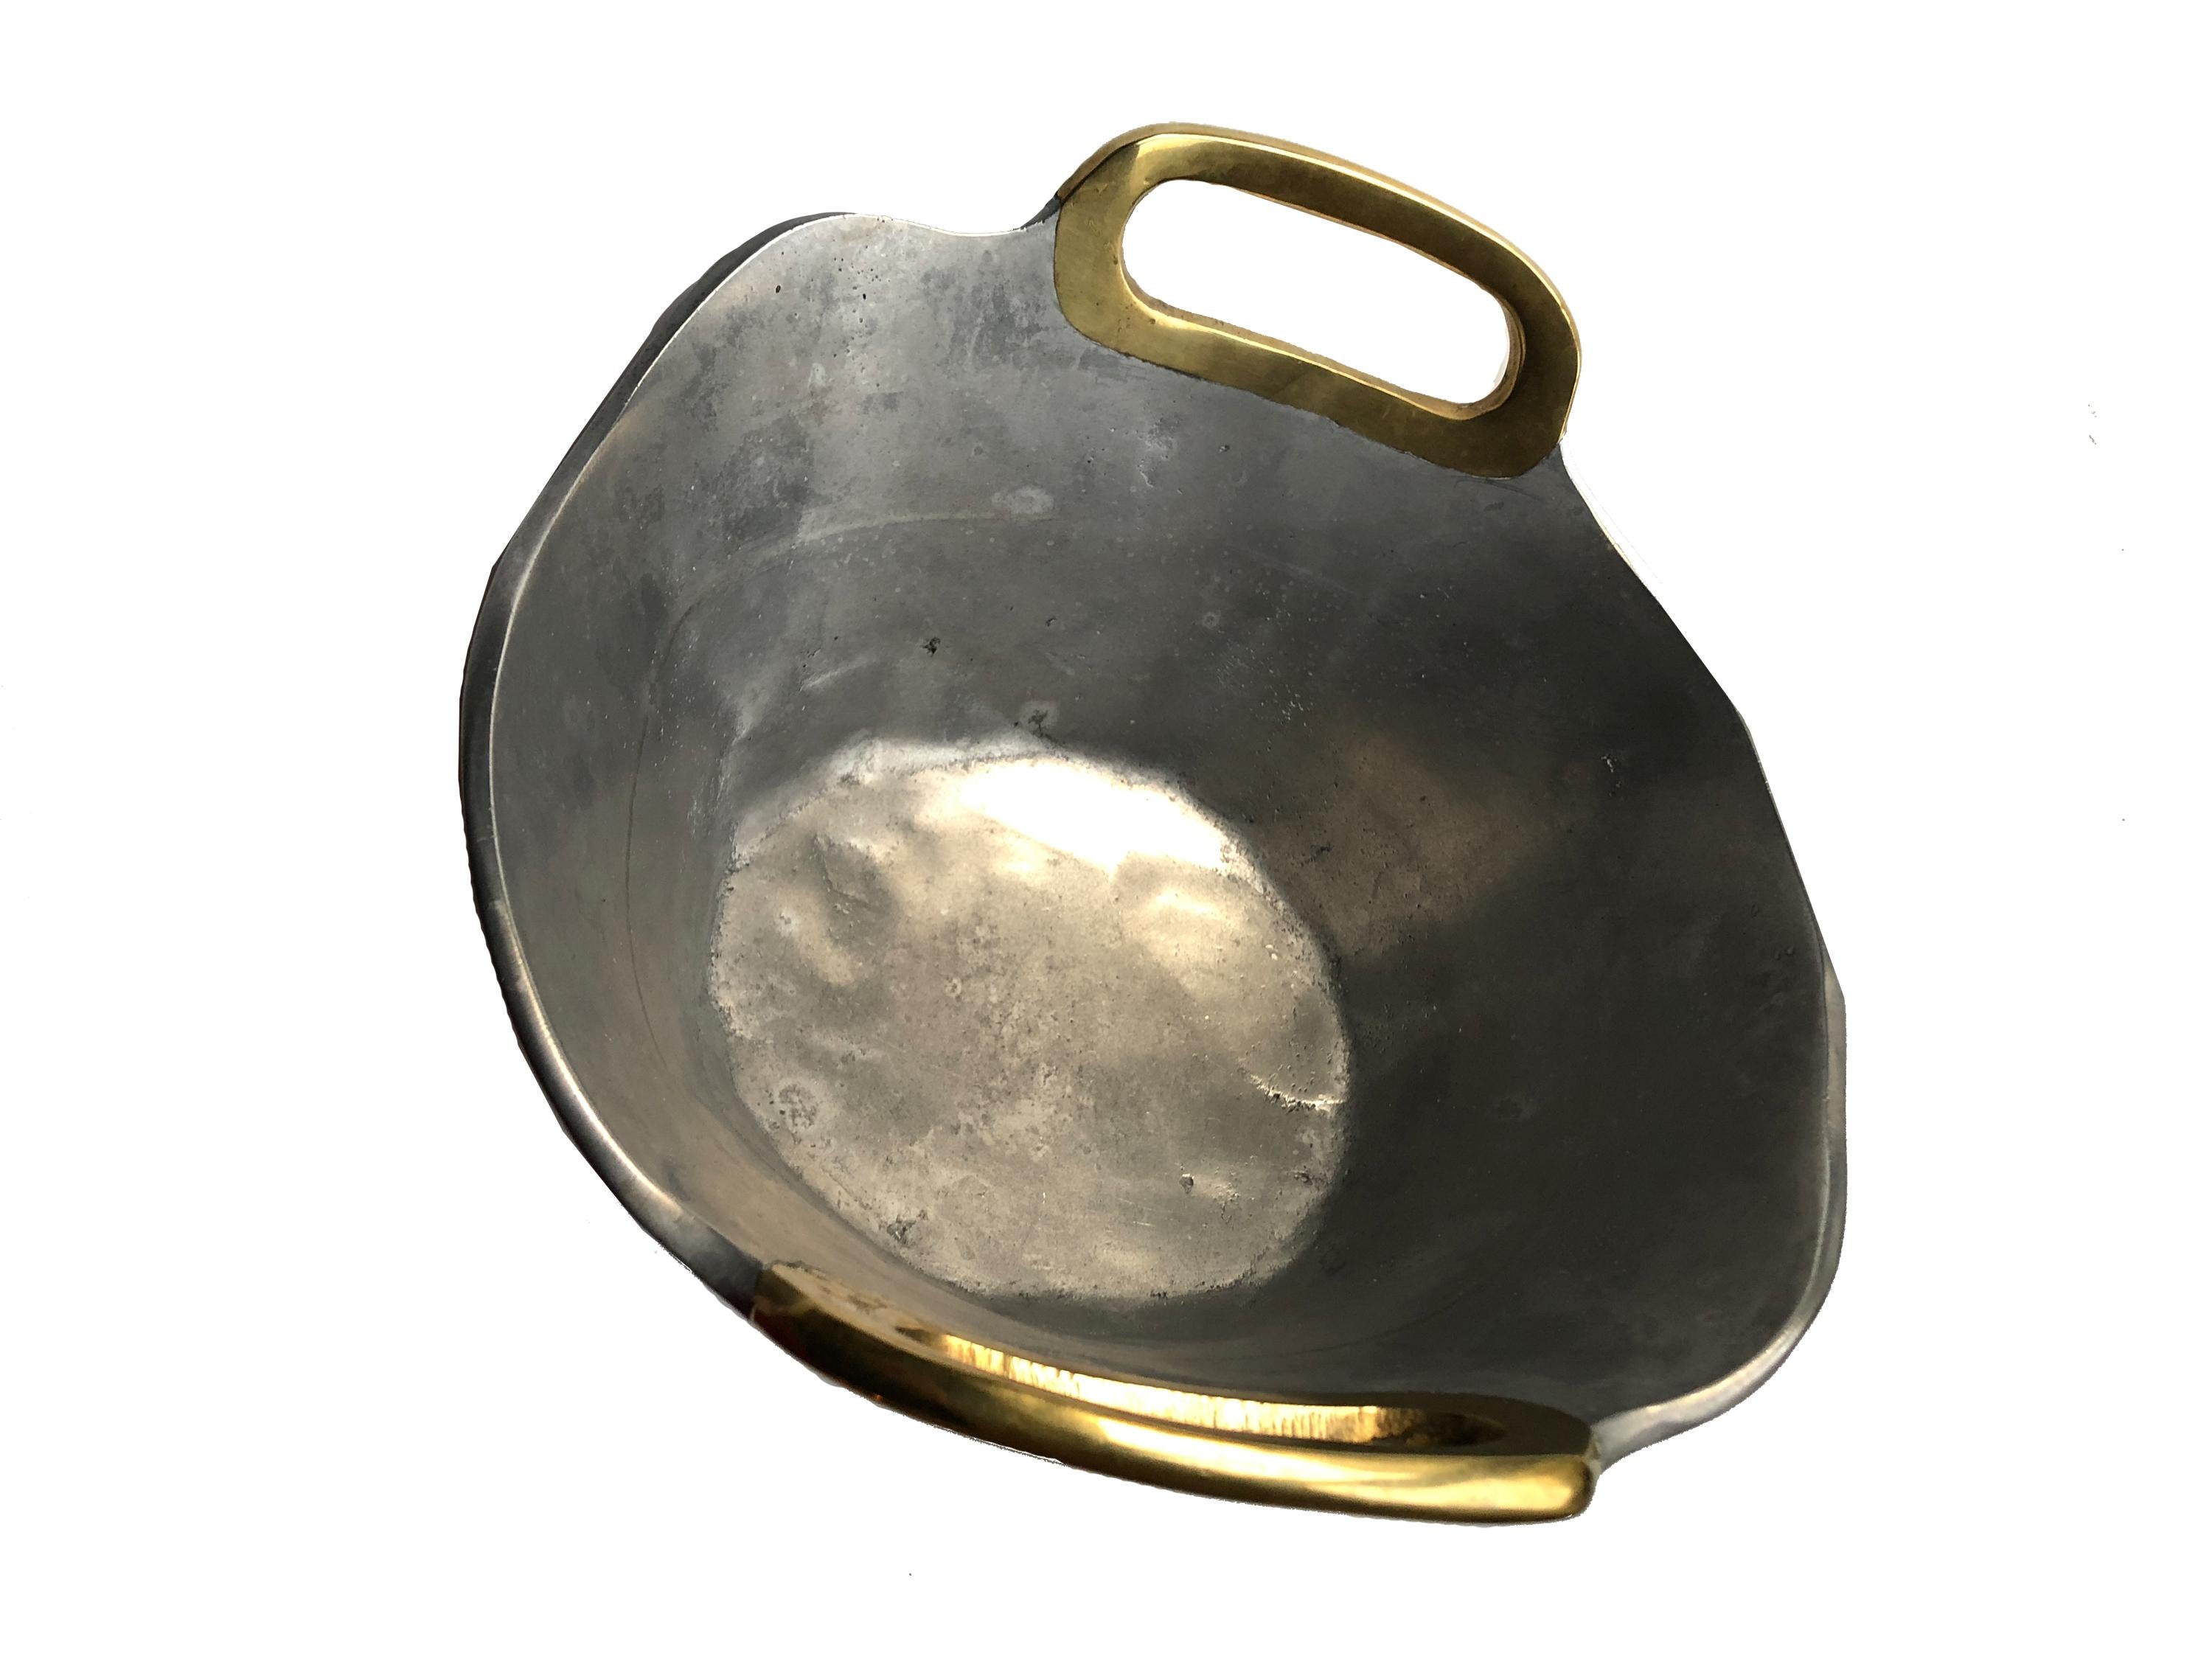 Brutalist Style Vintage Bowl in Brass Aluminium by David Marshall, Circa 1970s In Good Condition For Sale In Stockholm, SE